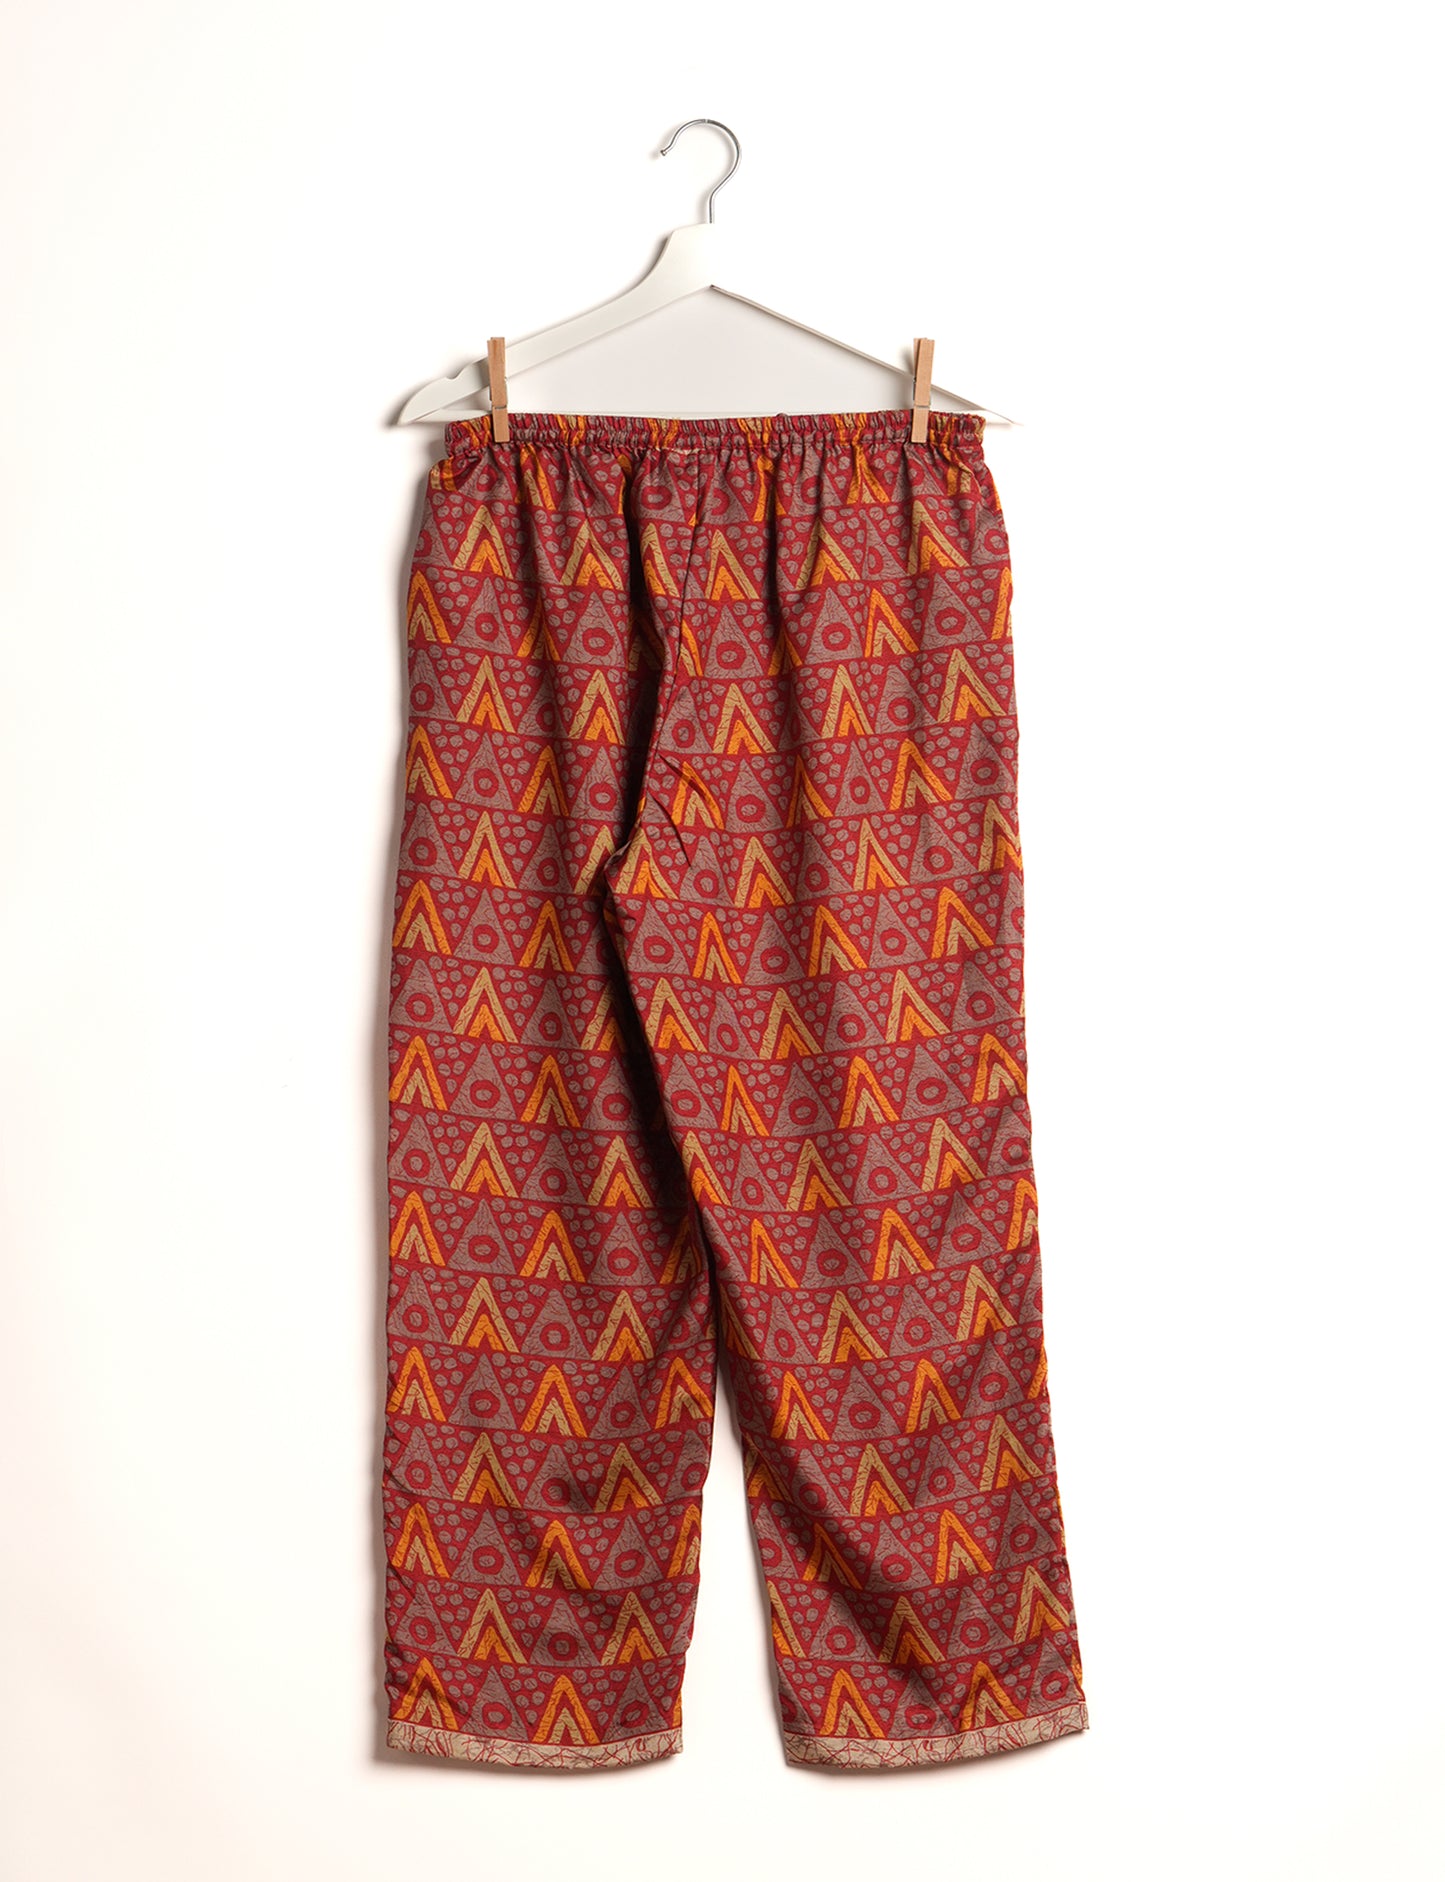 Elevate your wardrobe with our planet-friendly PULL-ON PANTS. Made from upcycled sari fabric, these eco-conscious pants offer a drawstring waist for a perfect fit. Tapered leg design ensures both style and comfort. Choose ethical, green fashion that supports artisans and sustainable living.